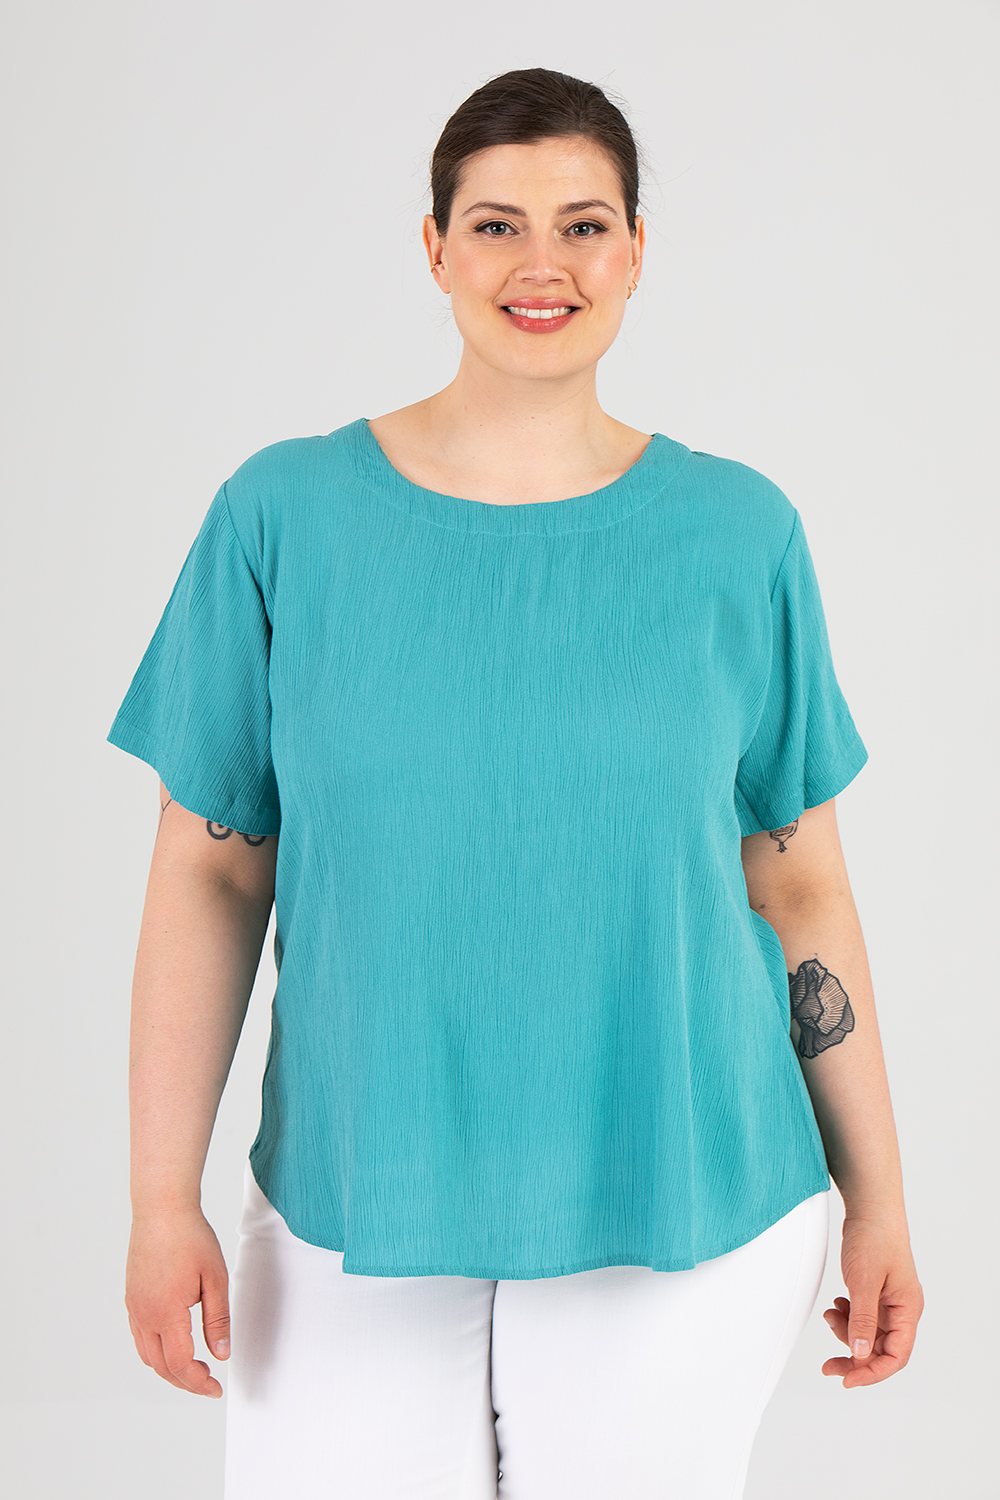 Look top turquoise